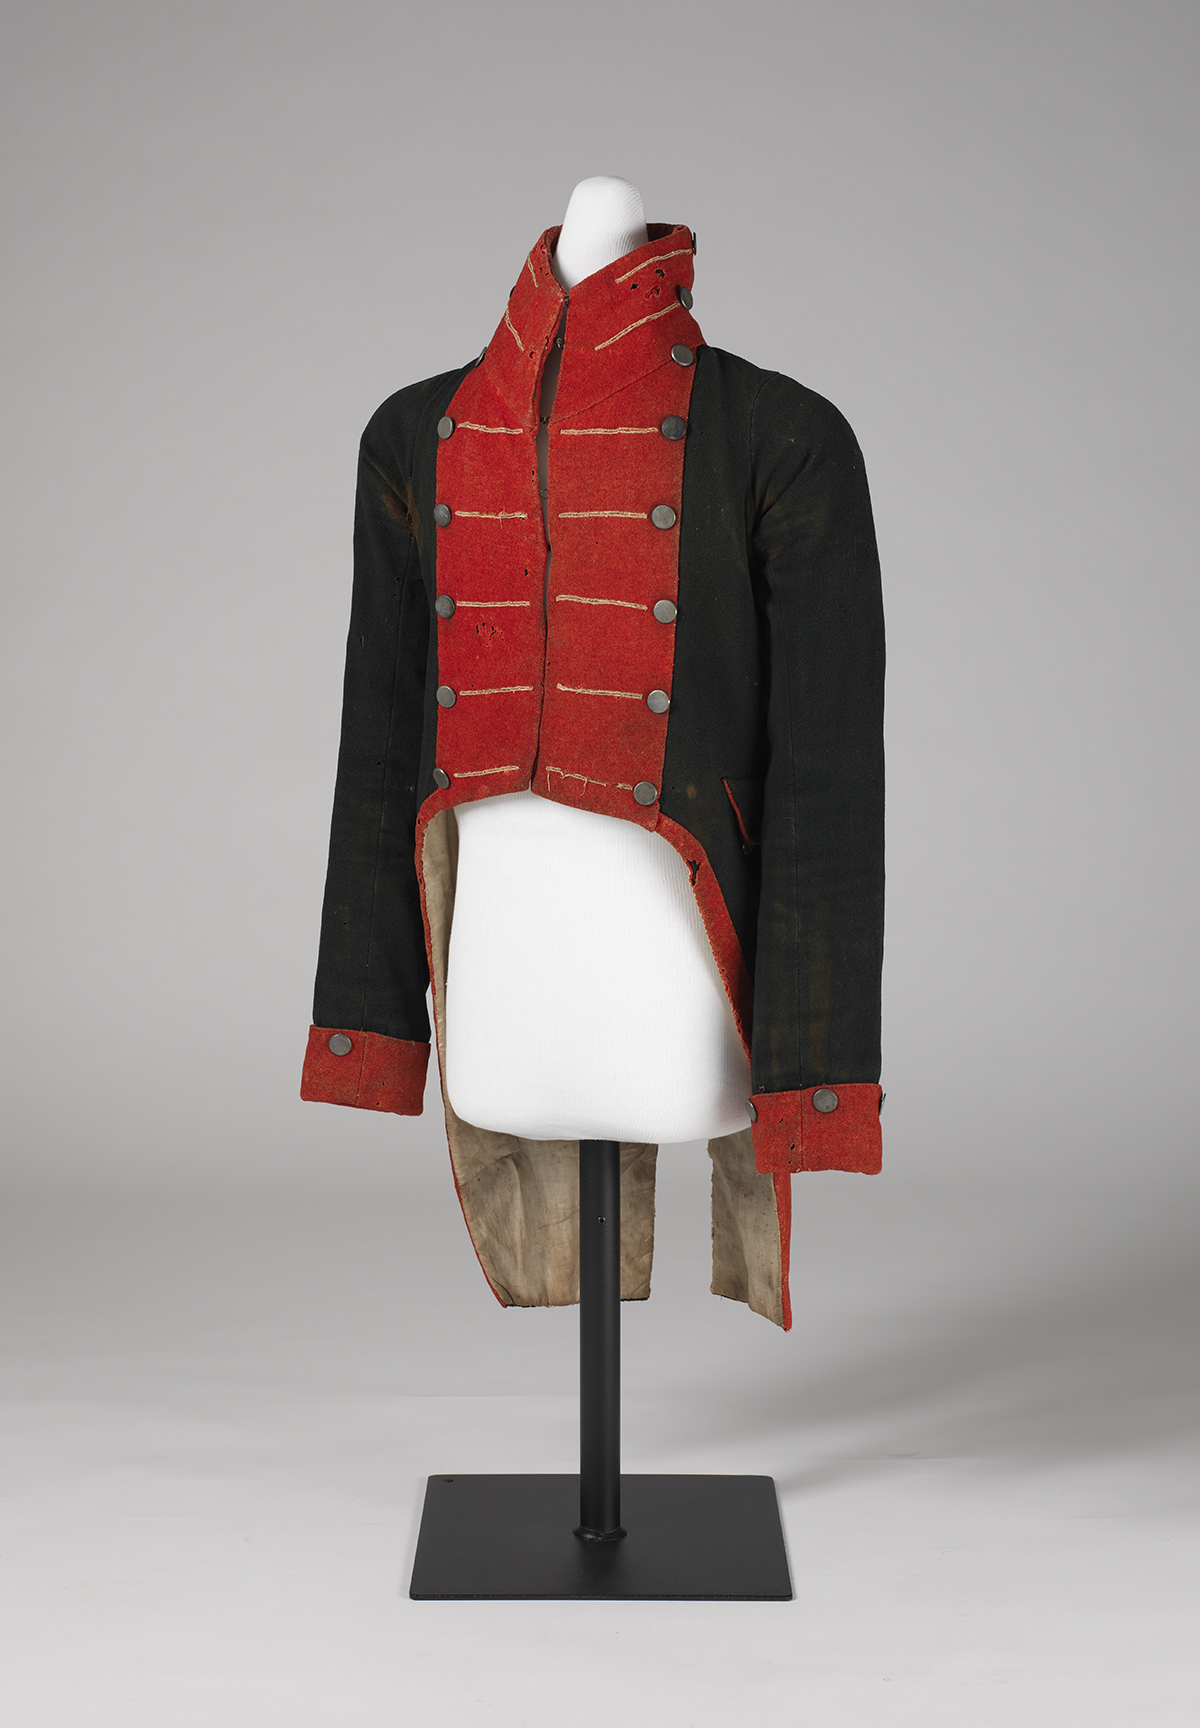 United States Army Infantry Coat (Front) worn by Martin Kirtland during the War of 1812